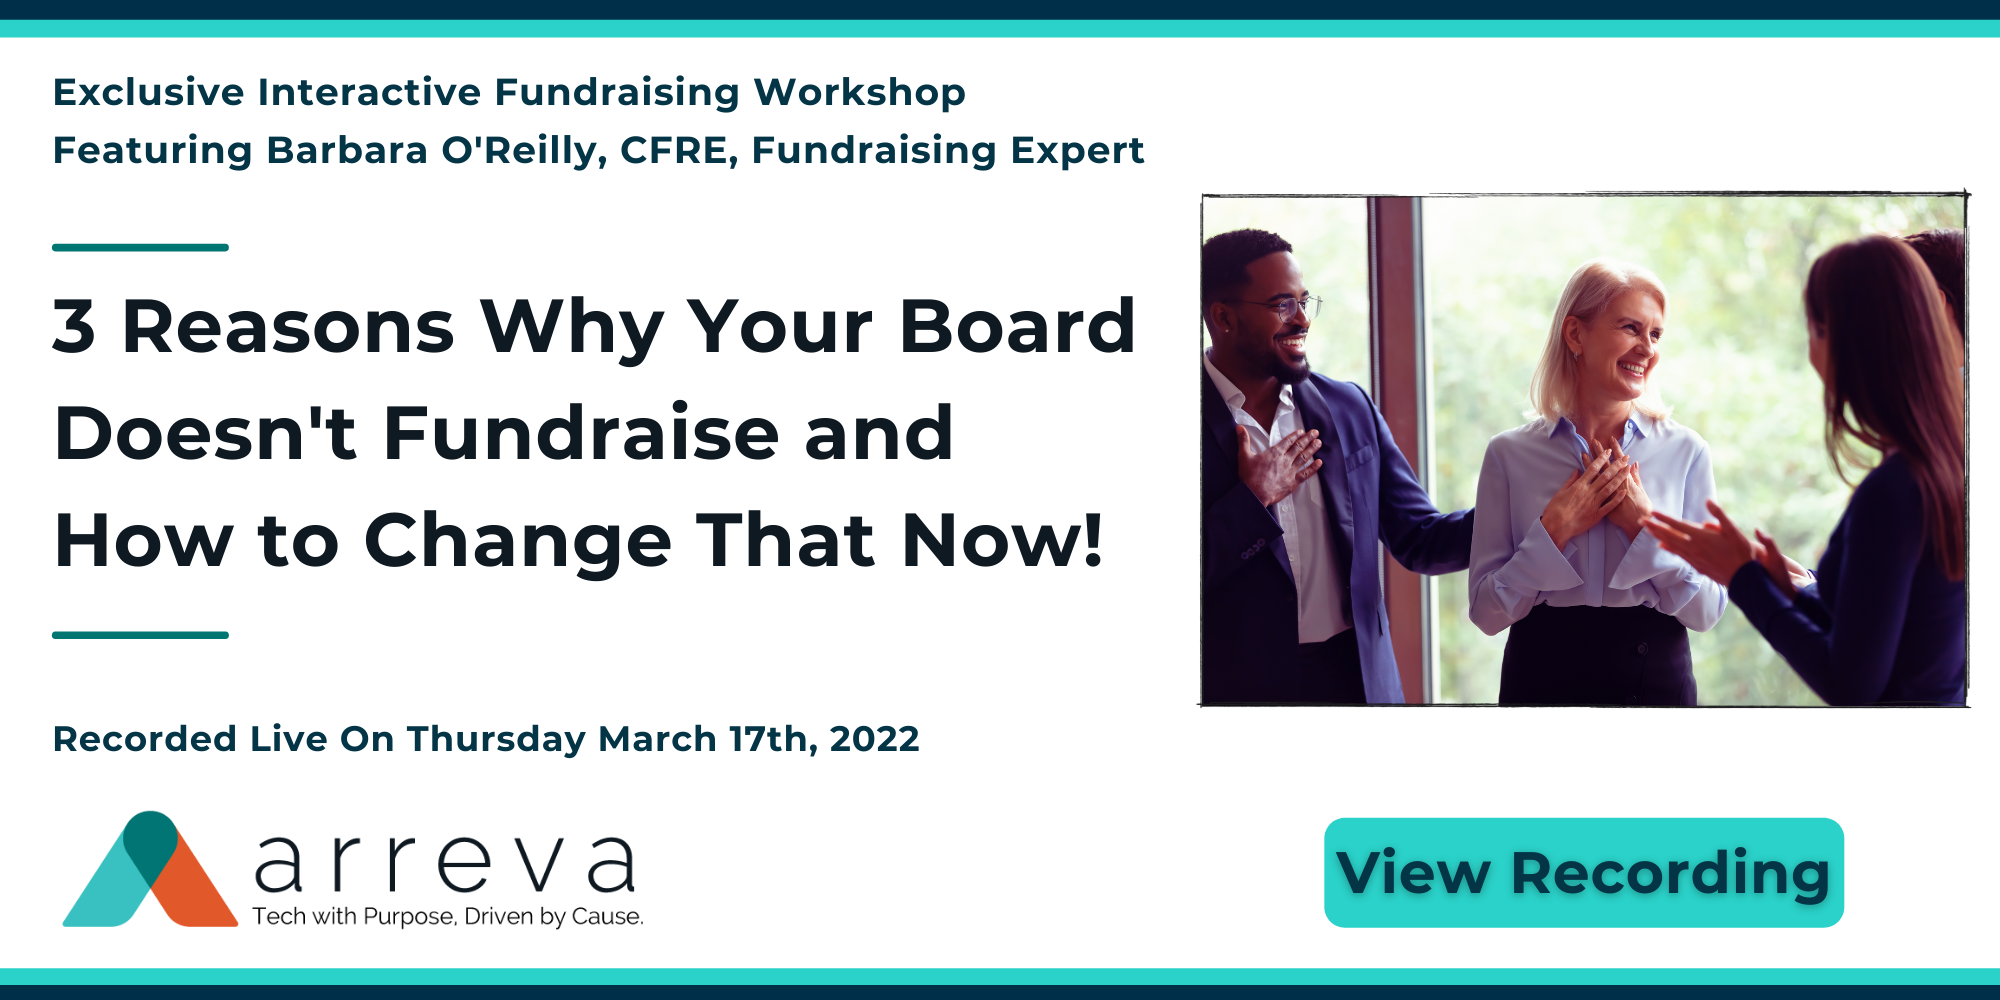 March  2022  Arreva Webinar - Exclusive, Interactive Fundraising Workshop - 3 Reasons Why Your Board Doesnt Fundraise and How To Change That Now!  -  Featuring Barbara OReilly, Fundraising Expert   